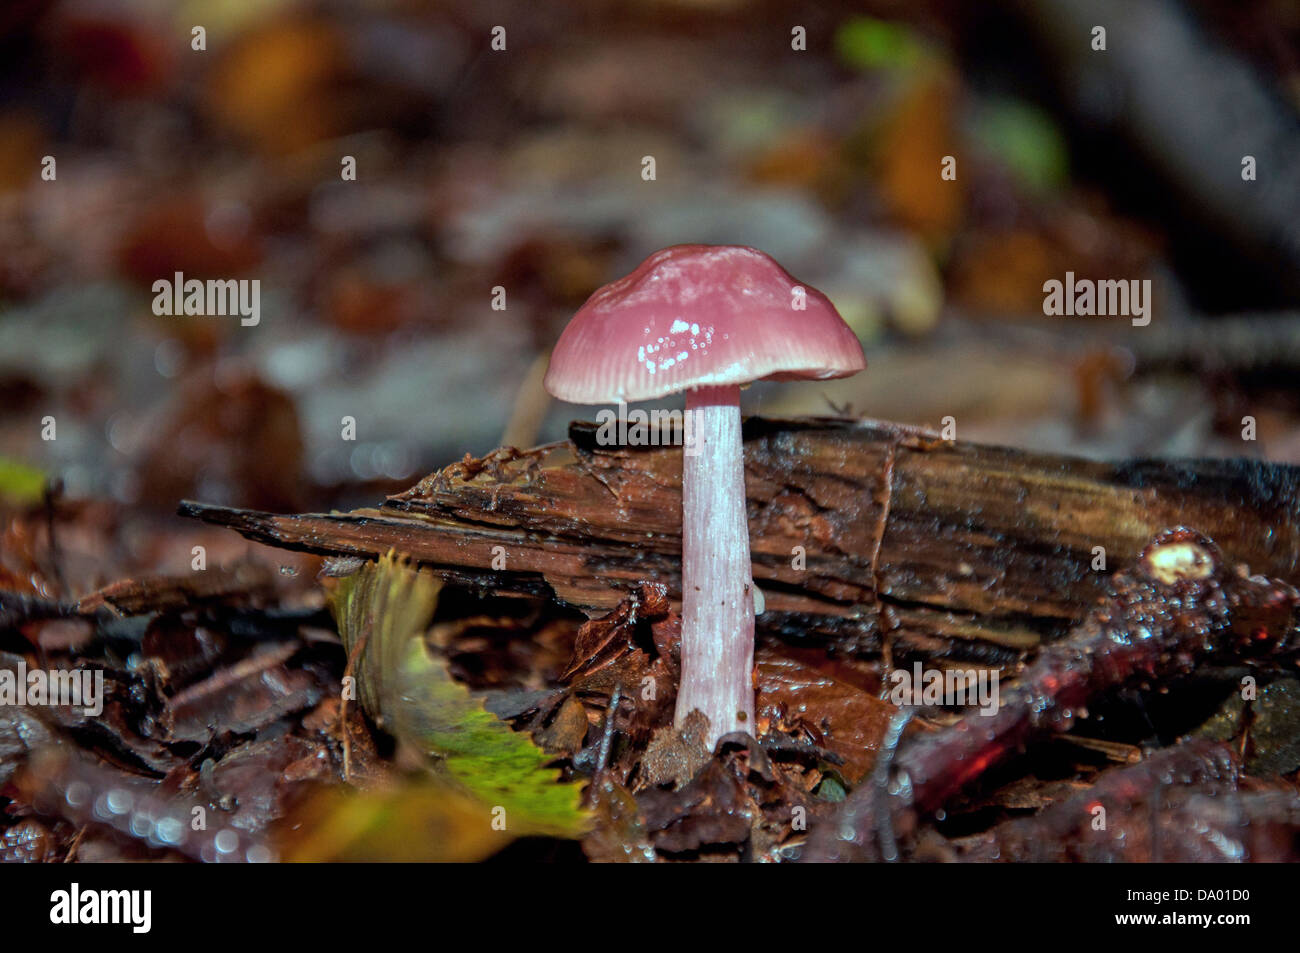 A mushroom in the forest undergrowth Stock Photo